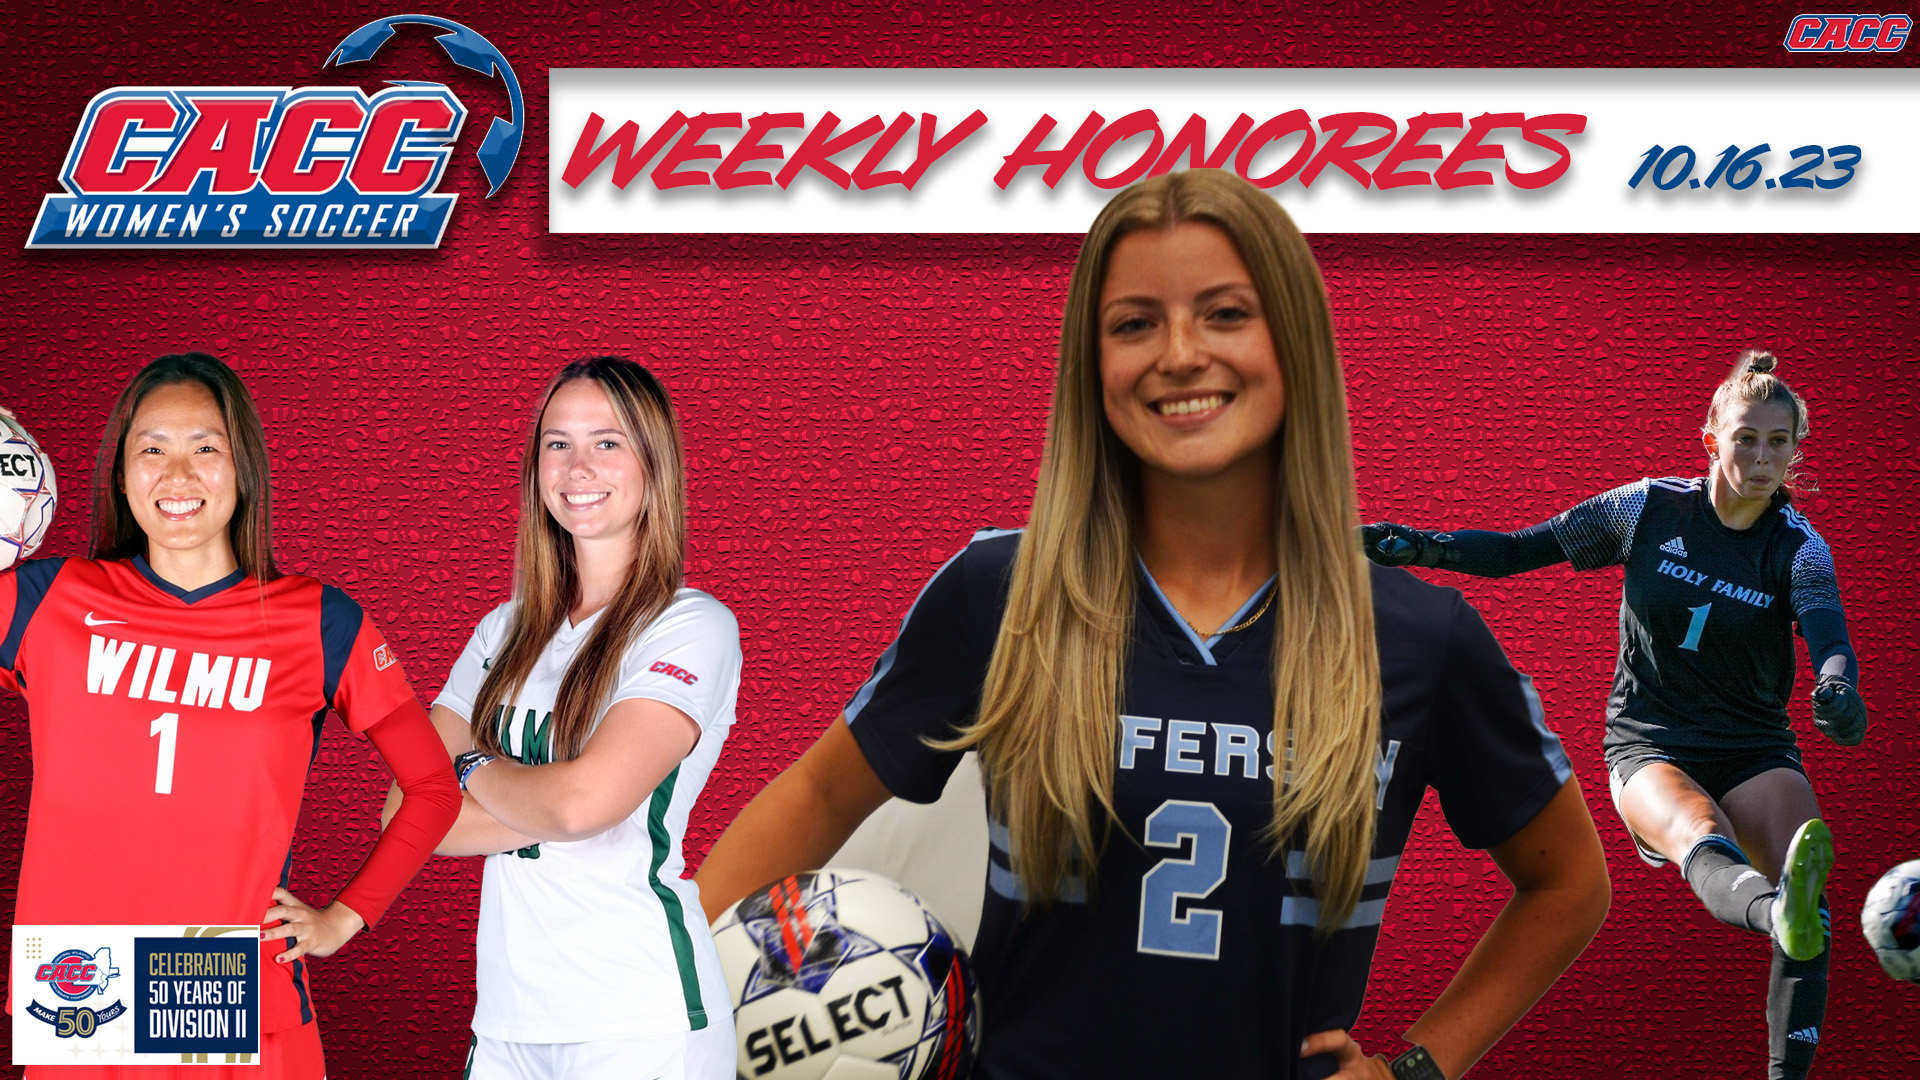 CACC Women's Soccer Weekly Honorees (10-16-23)